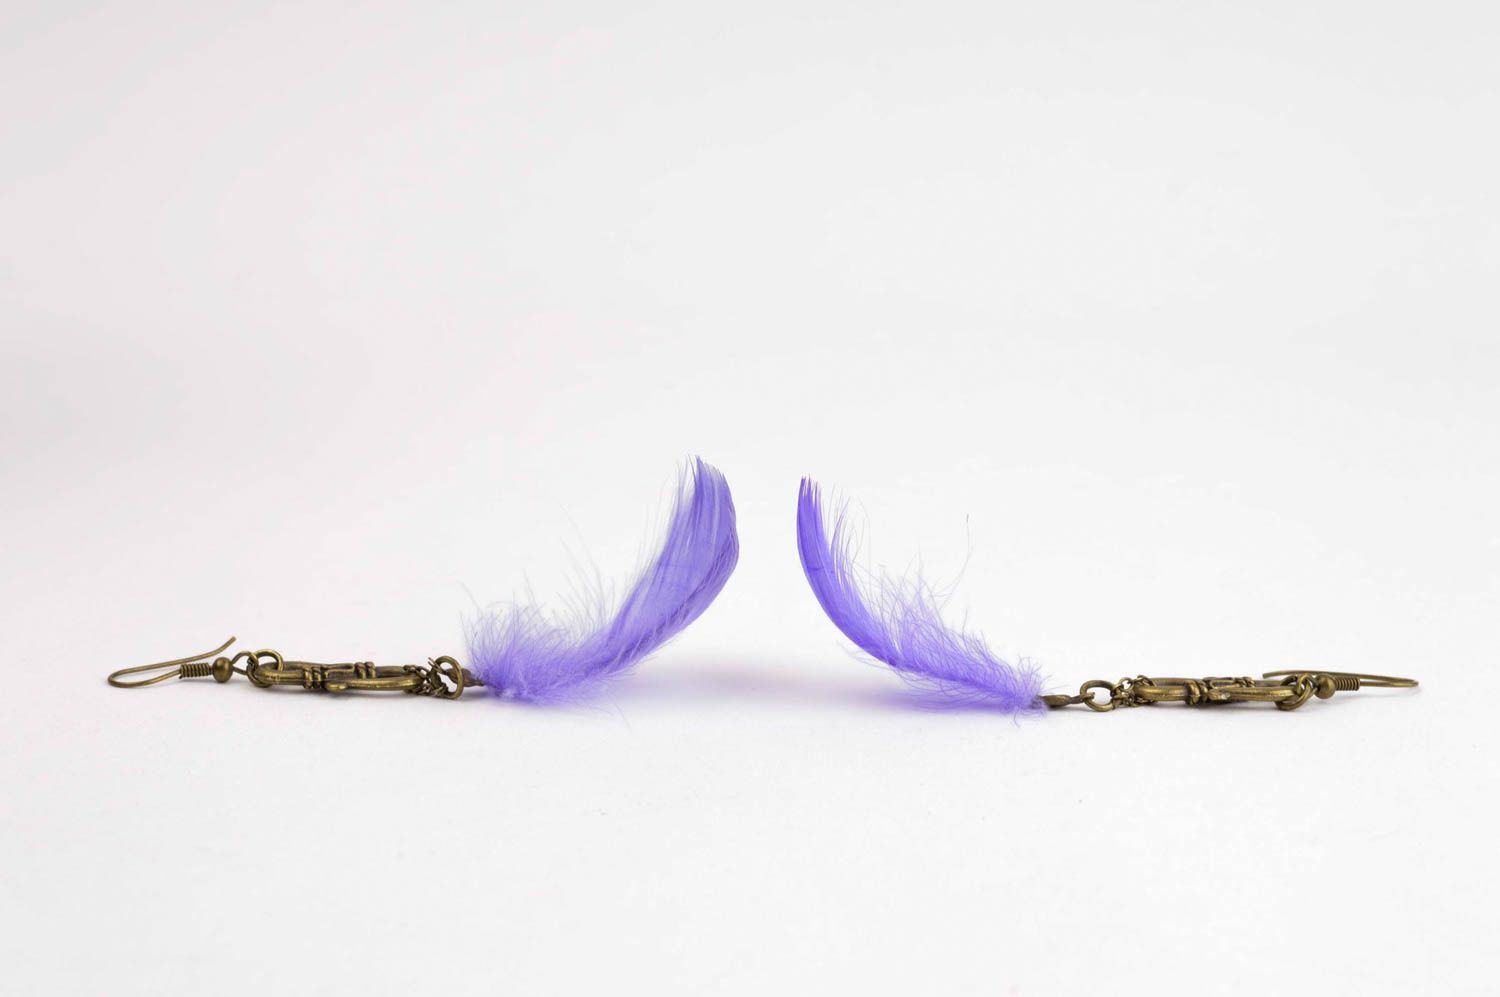 Handmade earrings with charms long feather earrings unusual jewelry gift ideas photo 3